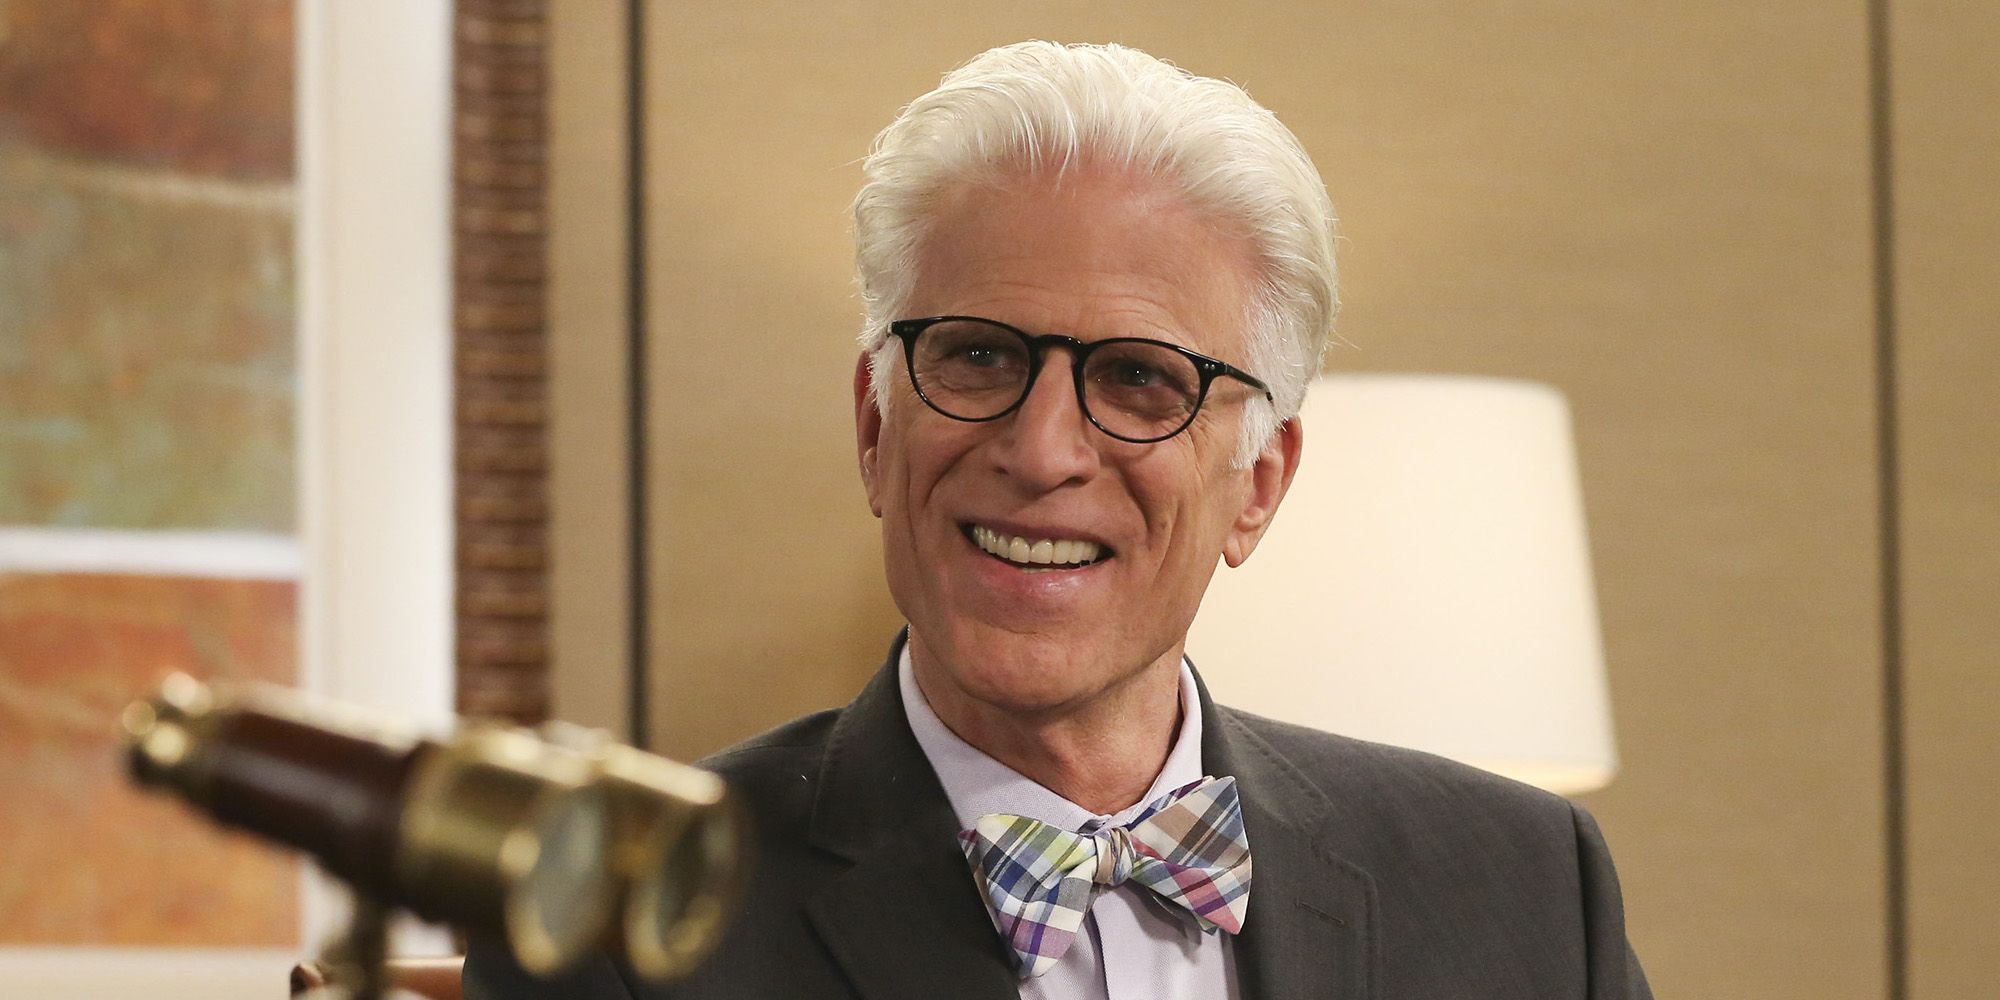 Michael smiling in The Good Place